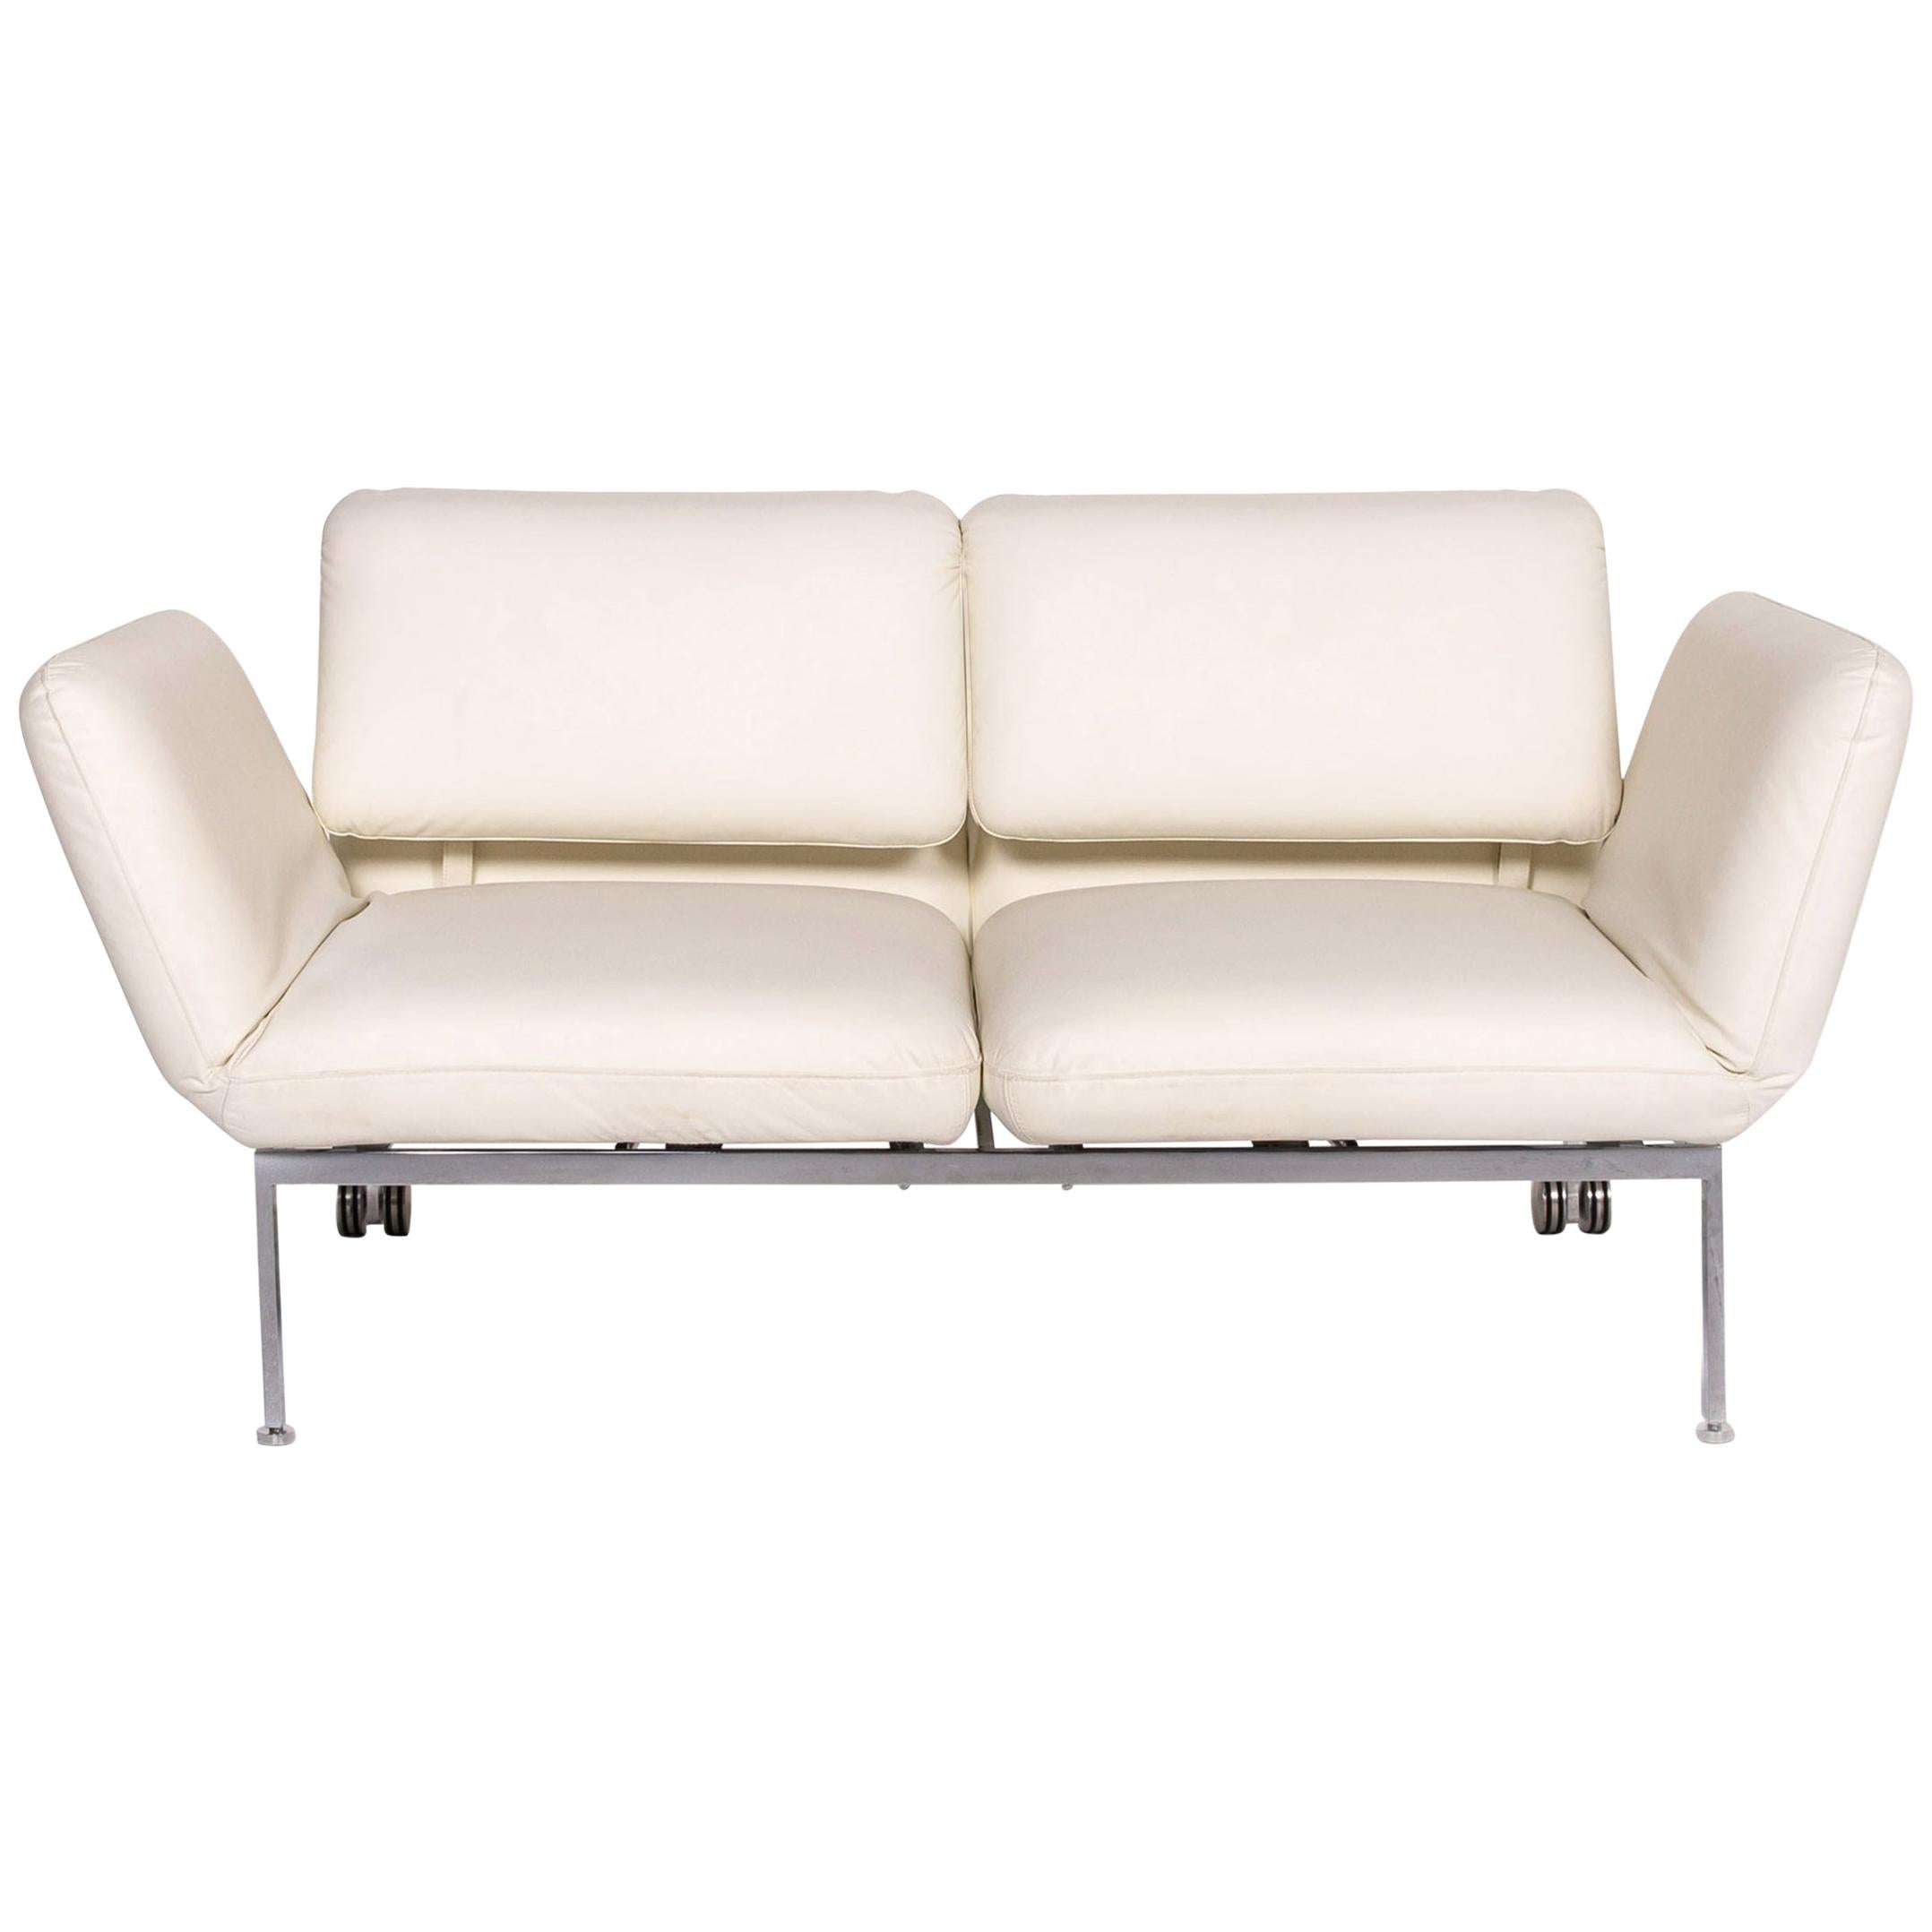 Brühl & Sippold Roro Leather Sofa White Two-Seat Function Sleeping Function For Sale